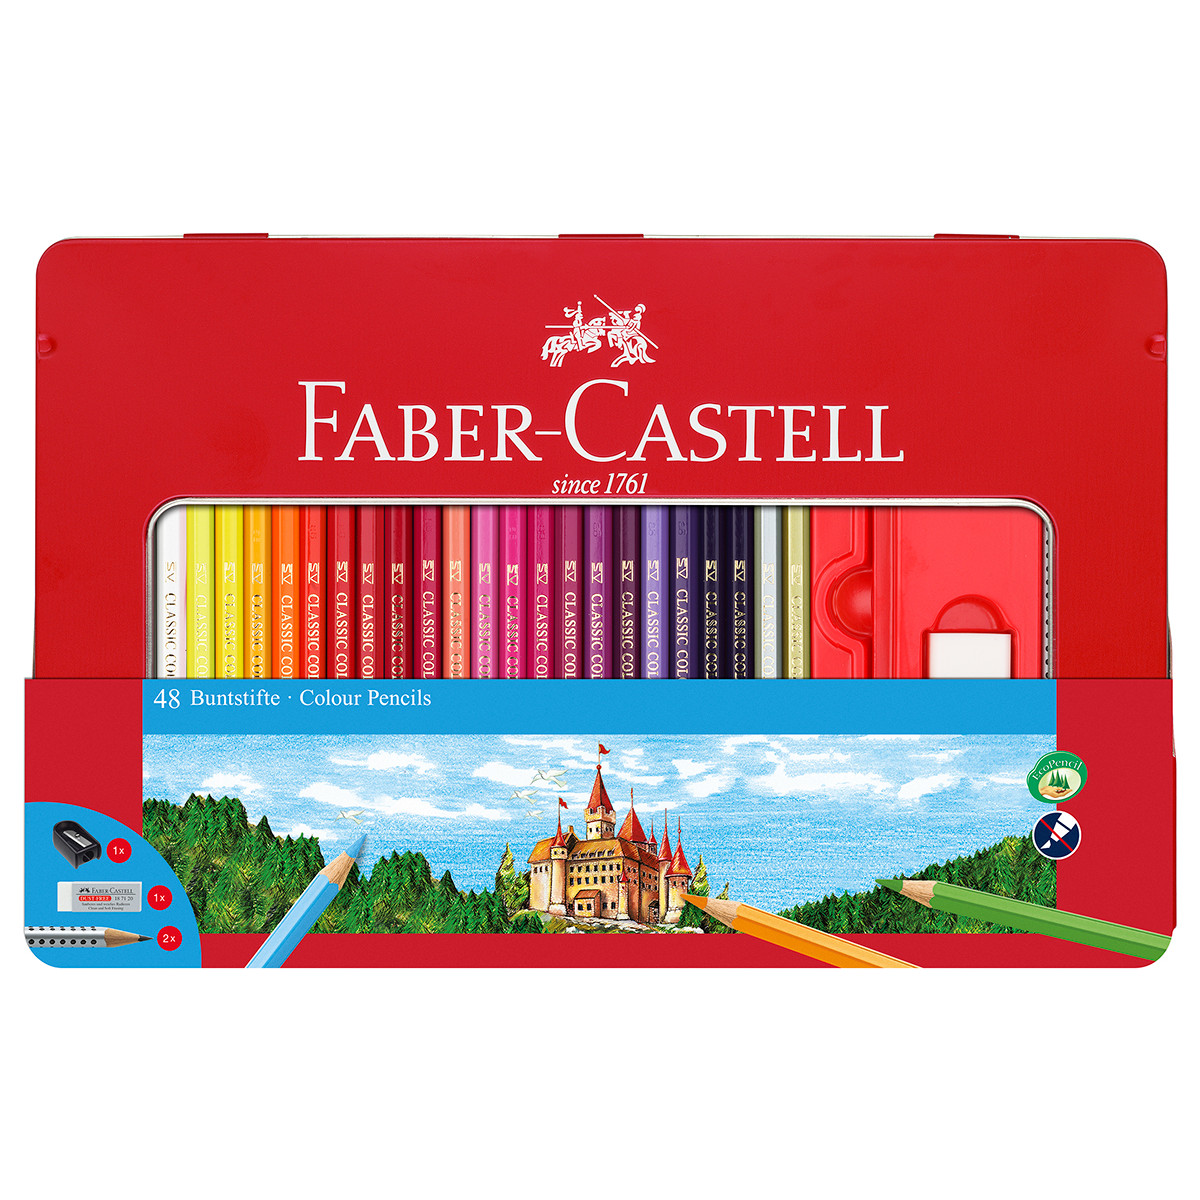 Faber-Castell Hexagonal Colouring Pencils - Assorted Colours (Tin of 48)